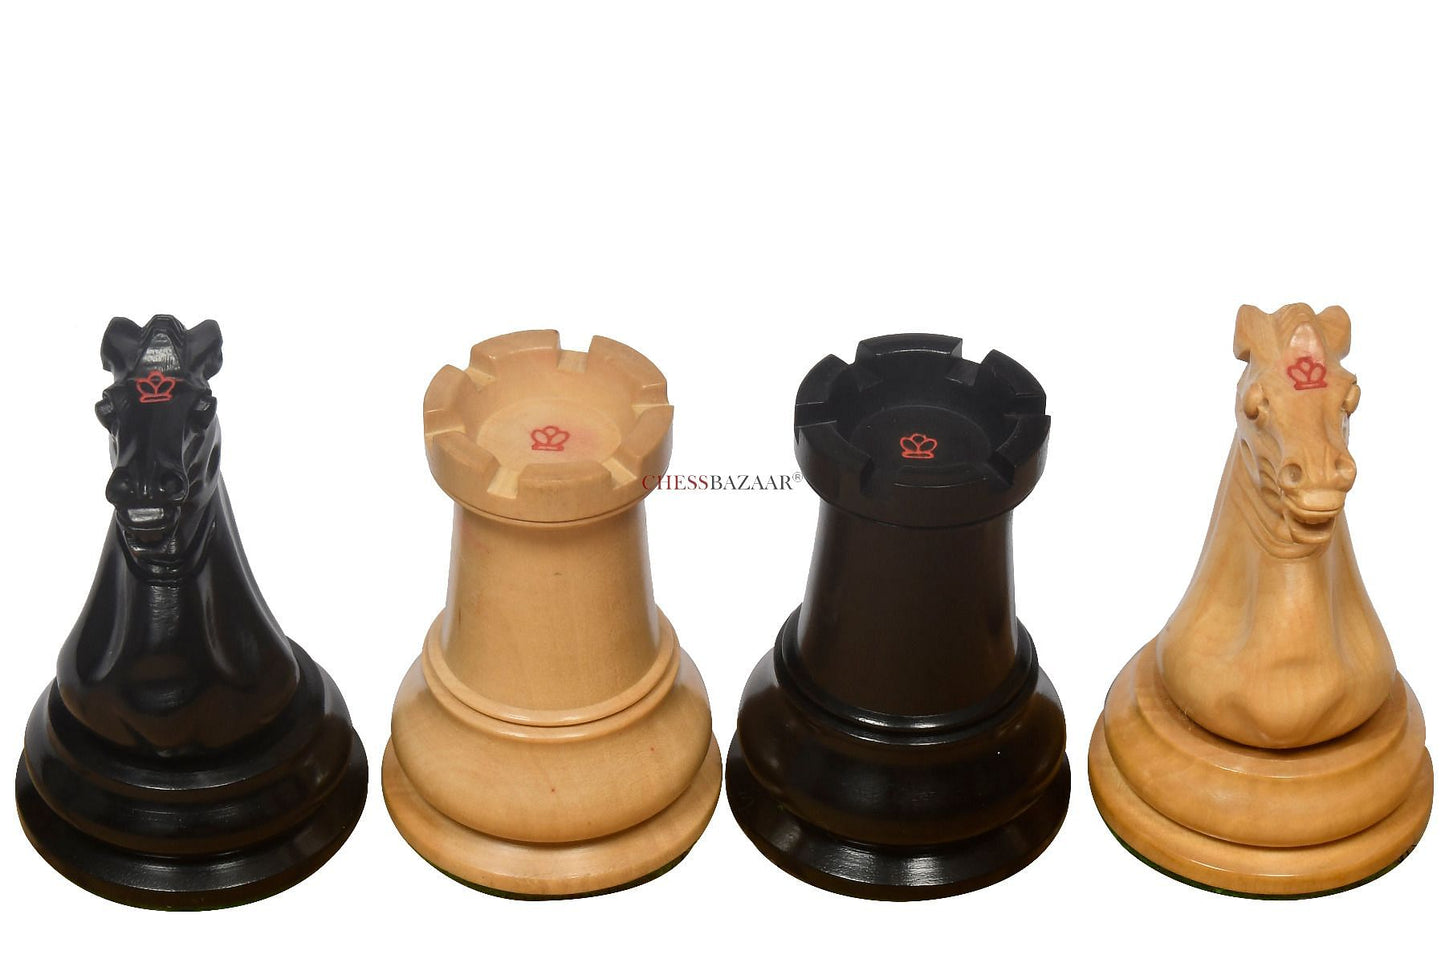 Reproduced 1849 Original Staunton Pattern Wooden Heavy Chess Pieces in Ebony / Boxwood with King Side Stamping - 3.75" King